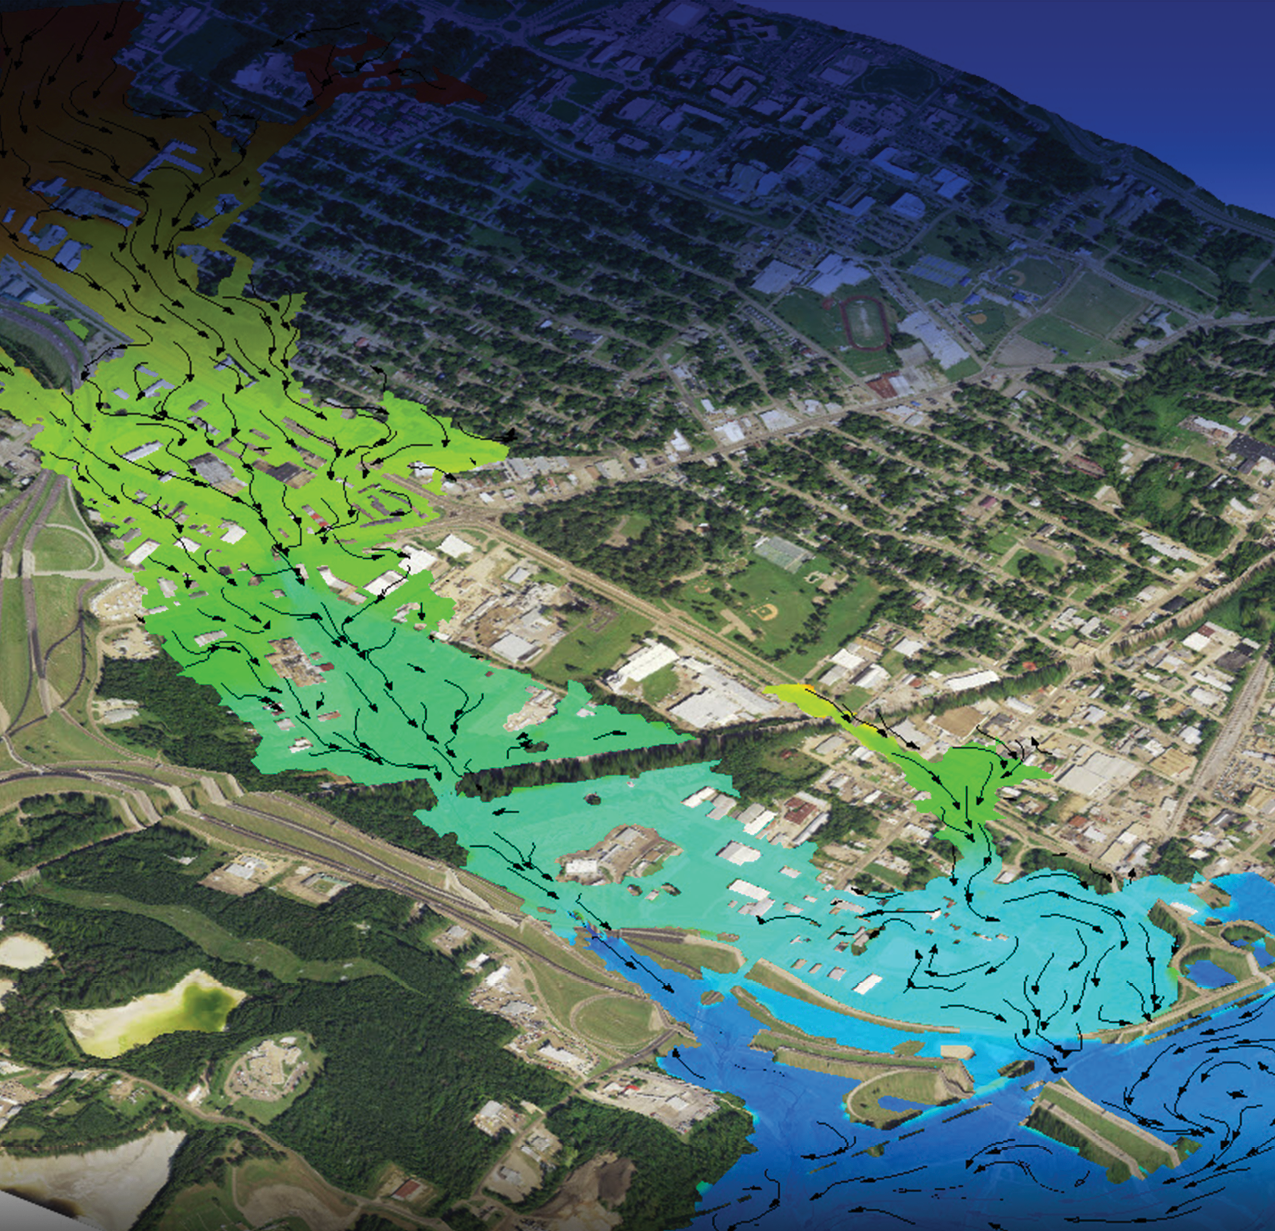 2D model of water surface elevations and velocity vectors over the Lynch Creek floodplain in Mississippi.